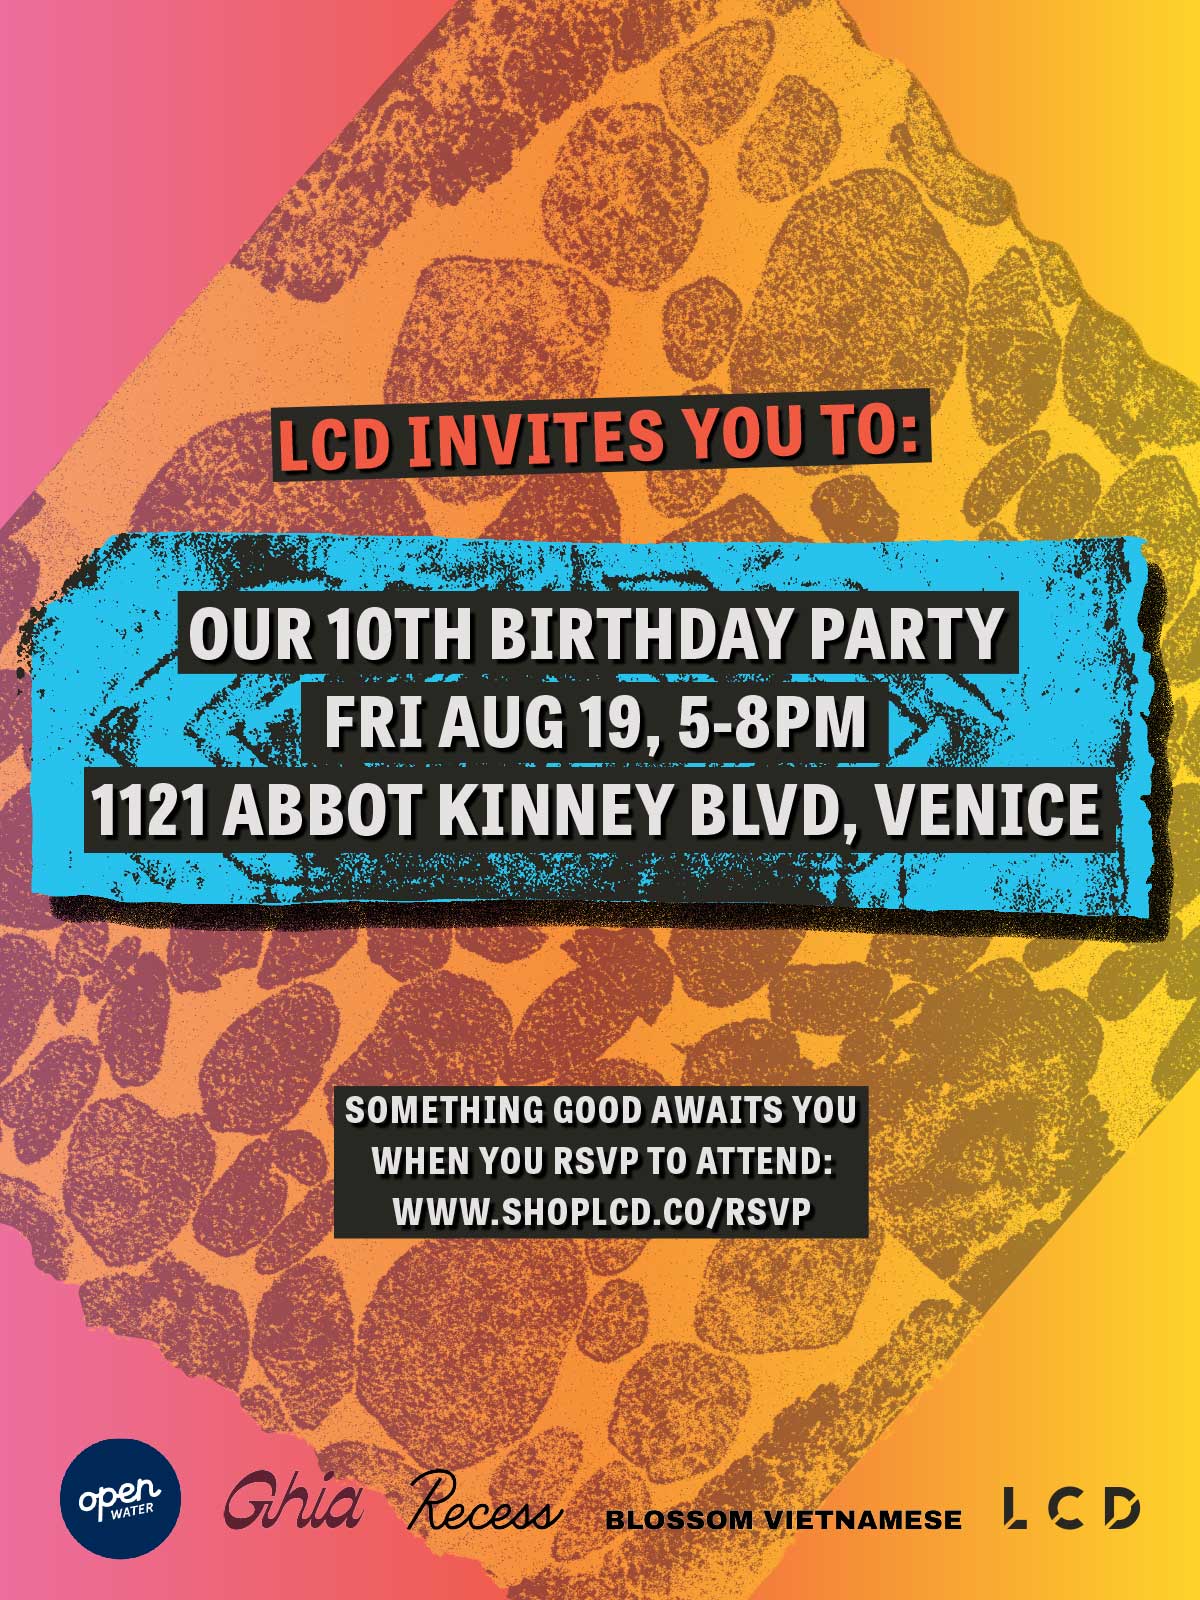 Photo of LCD 10TH birthday party invite. 